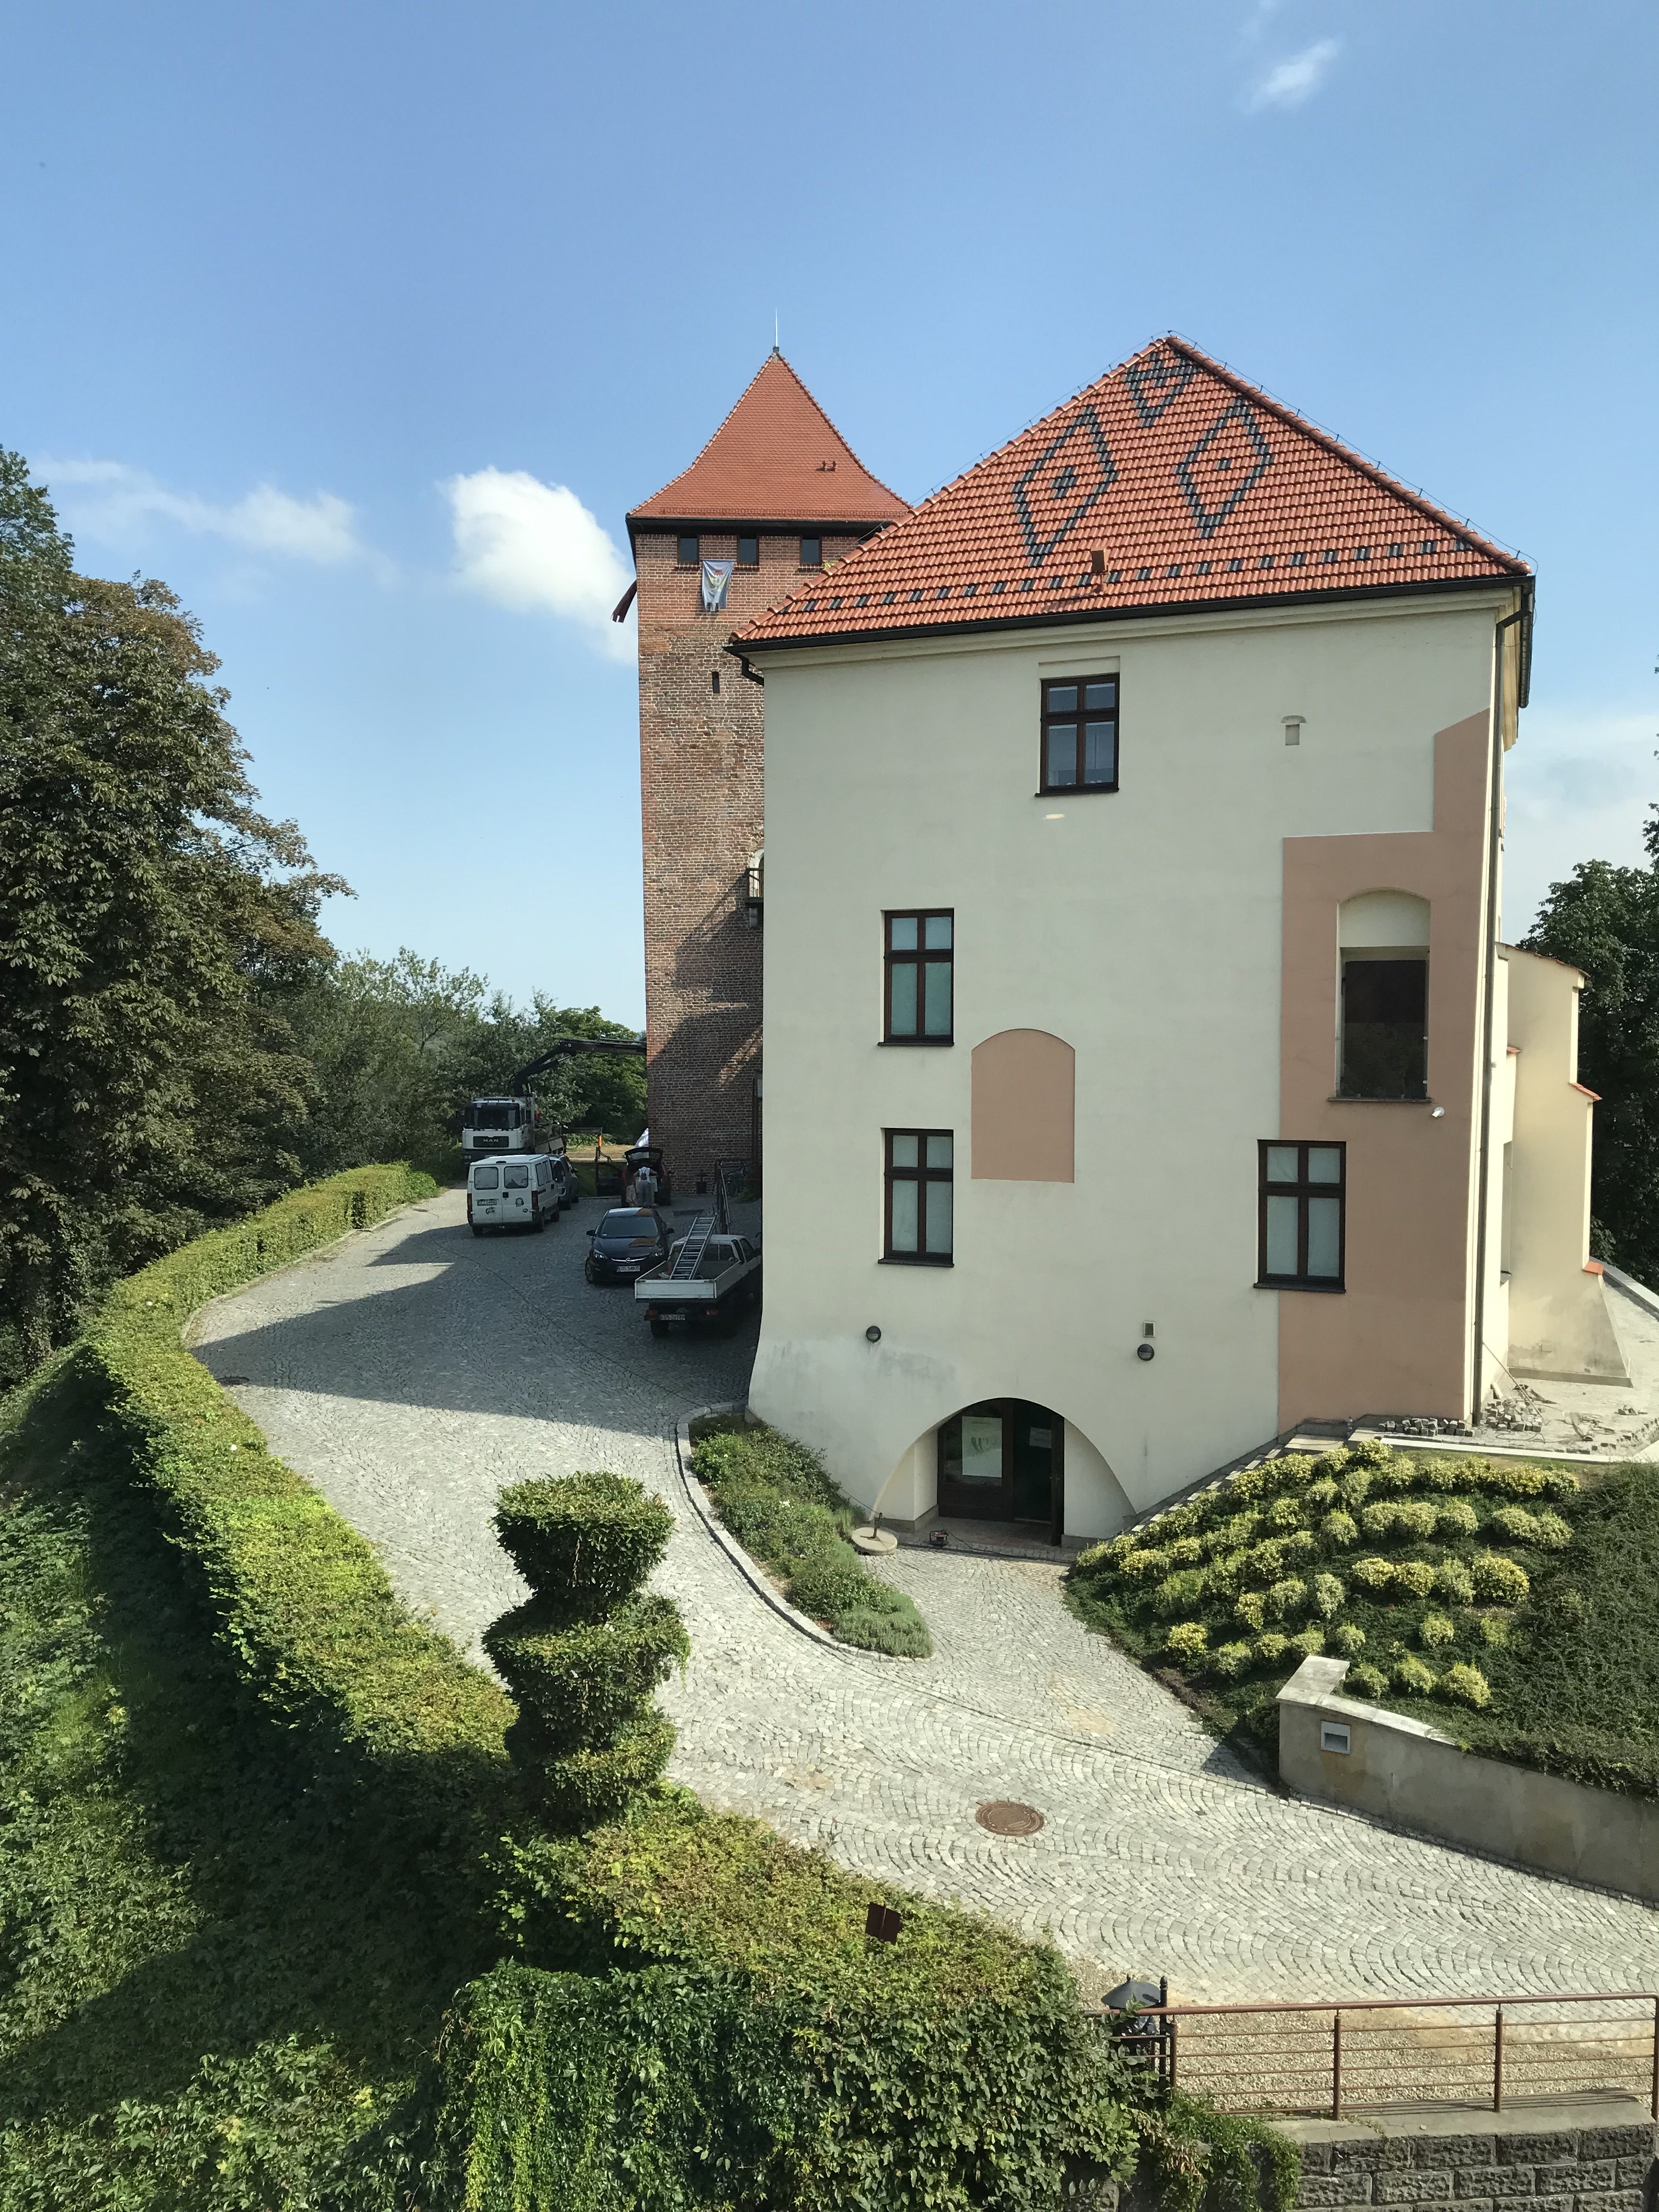 a building with a tower and a driveway